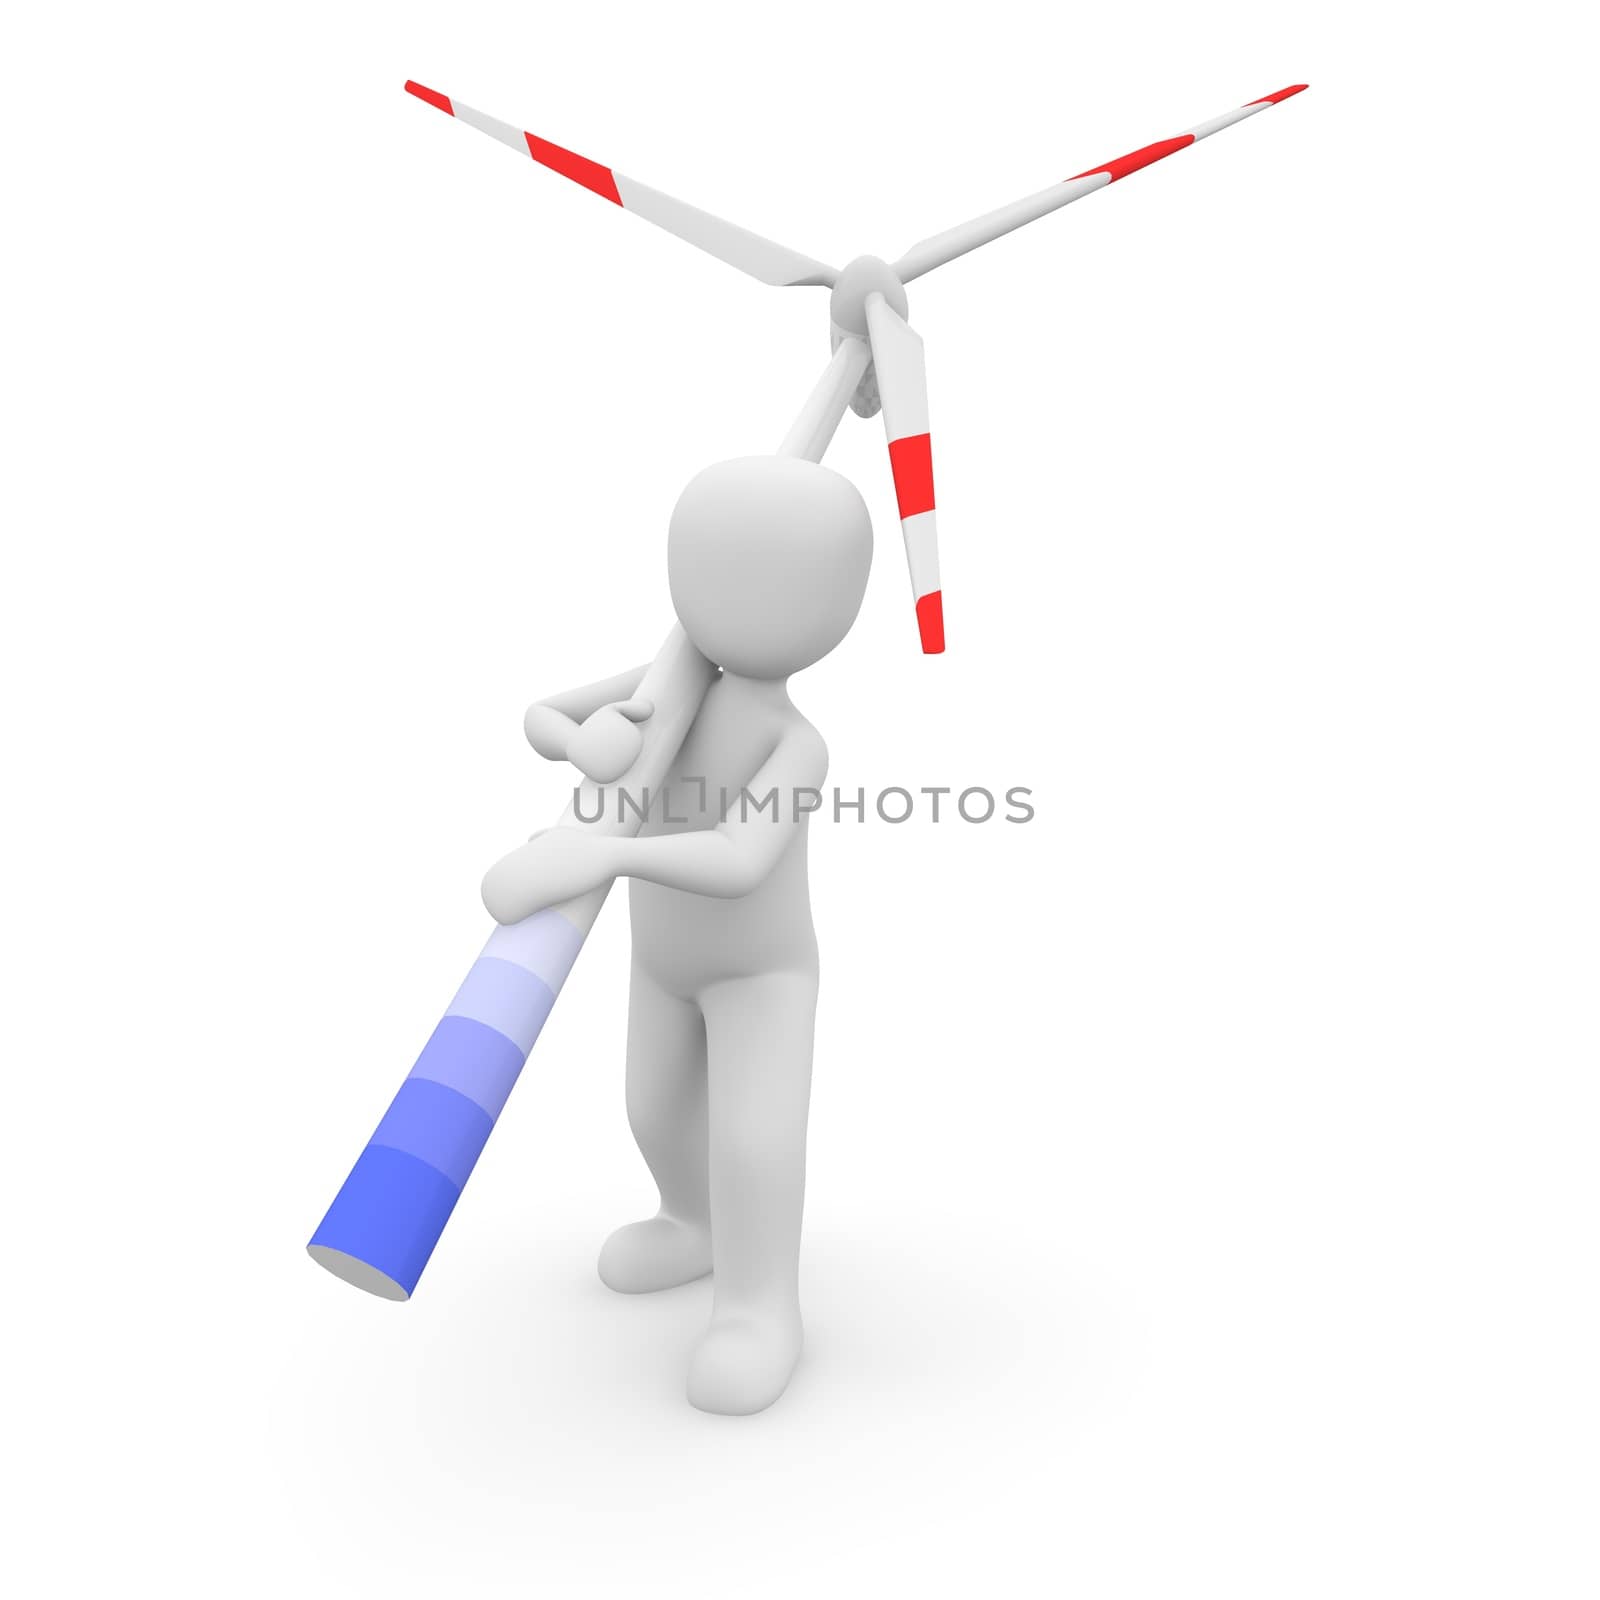 The character carries a windmill in his hands.